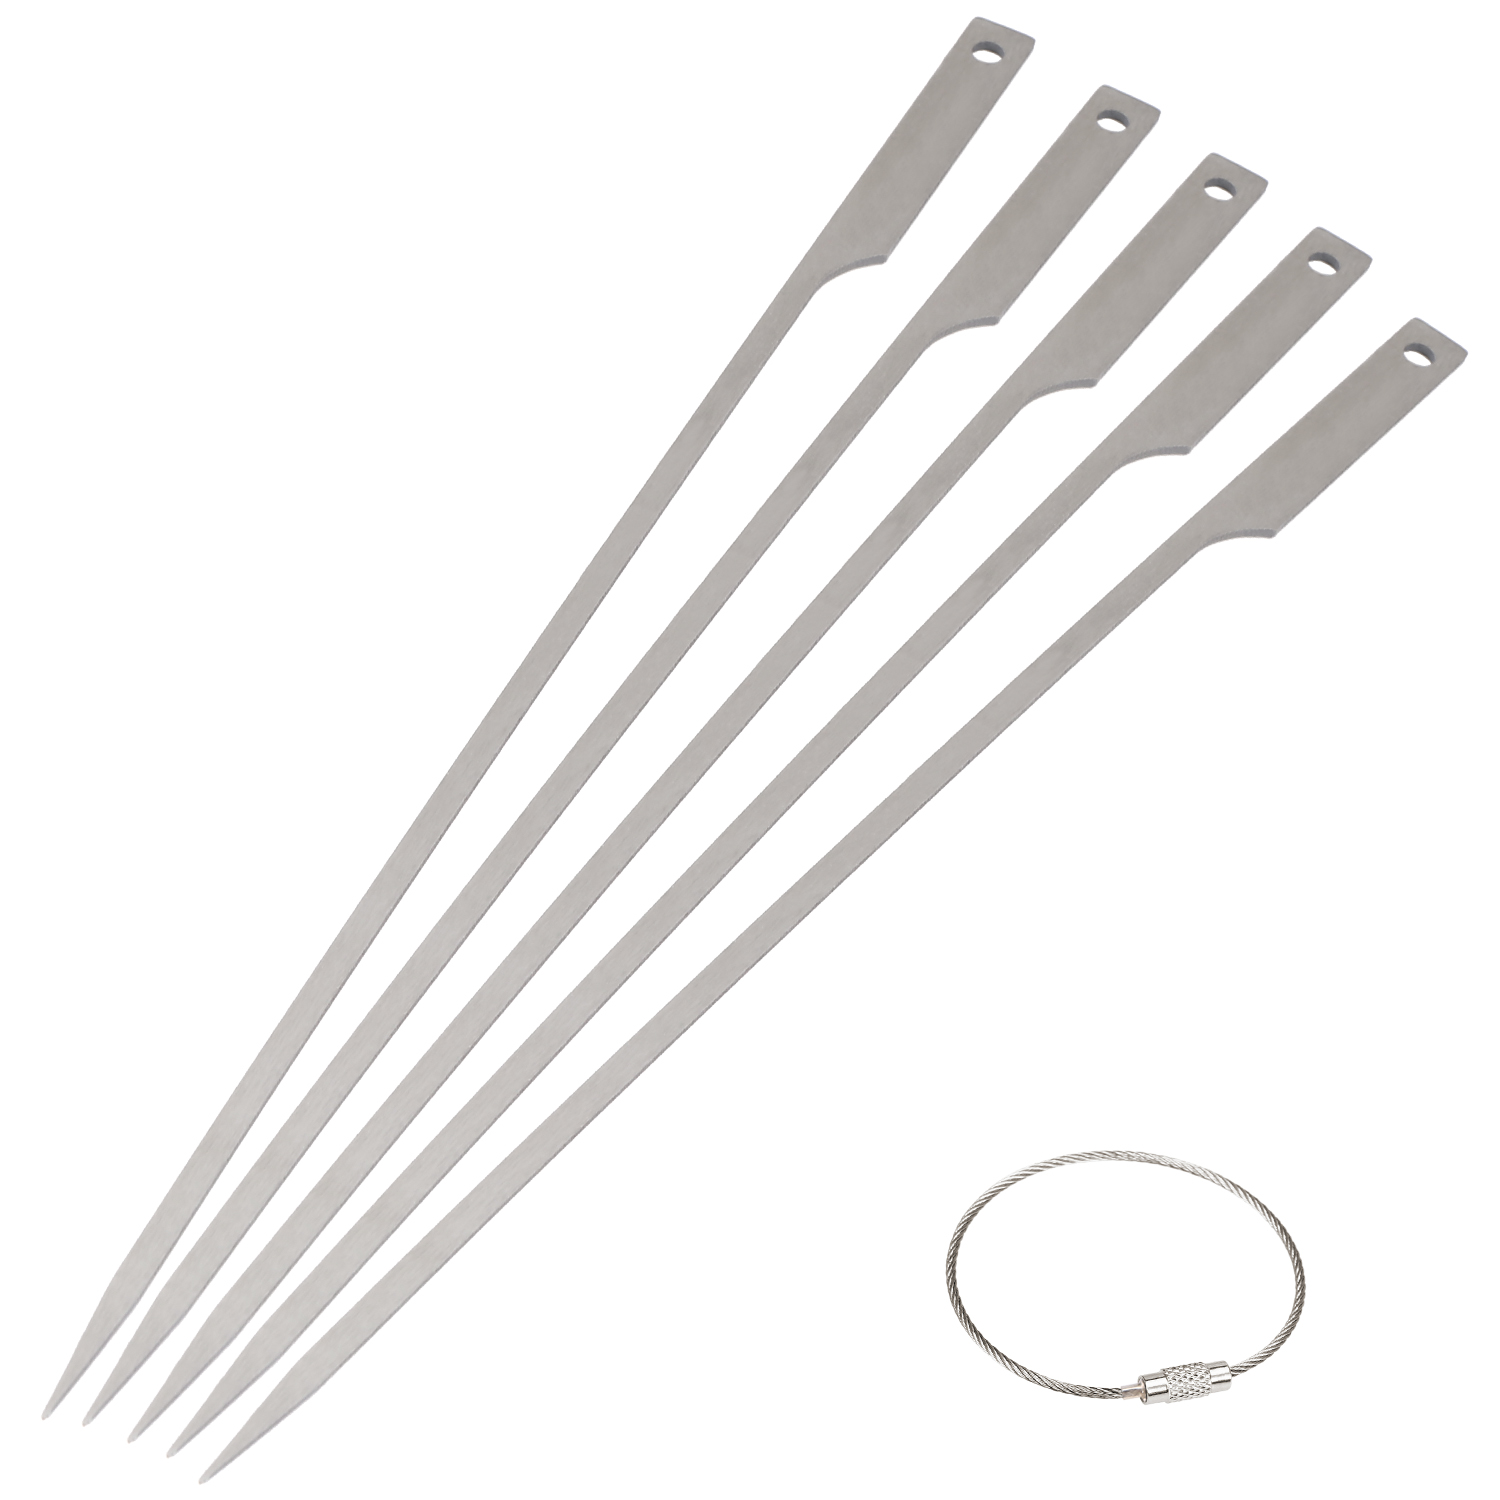 Lixada 5pcs 10 Inch Flat  Barbecue Skewers  Backyard Picnic BBQ Grilling Kabob Skewers BBQ  with Wire Ring - image 4 of 7